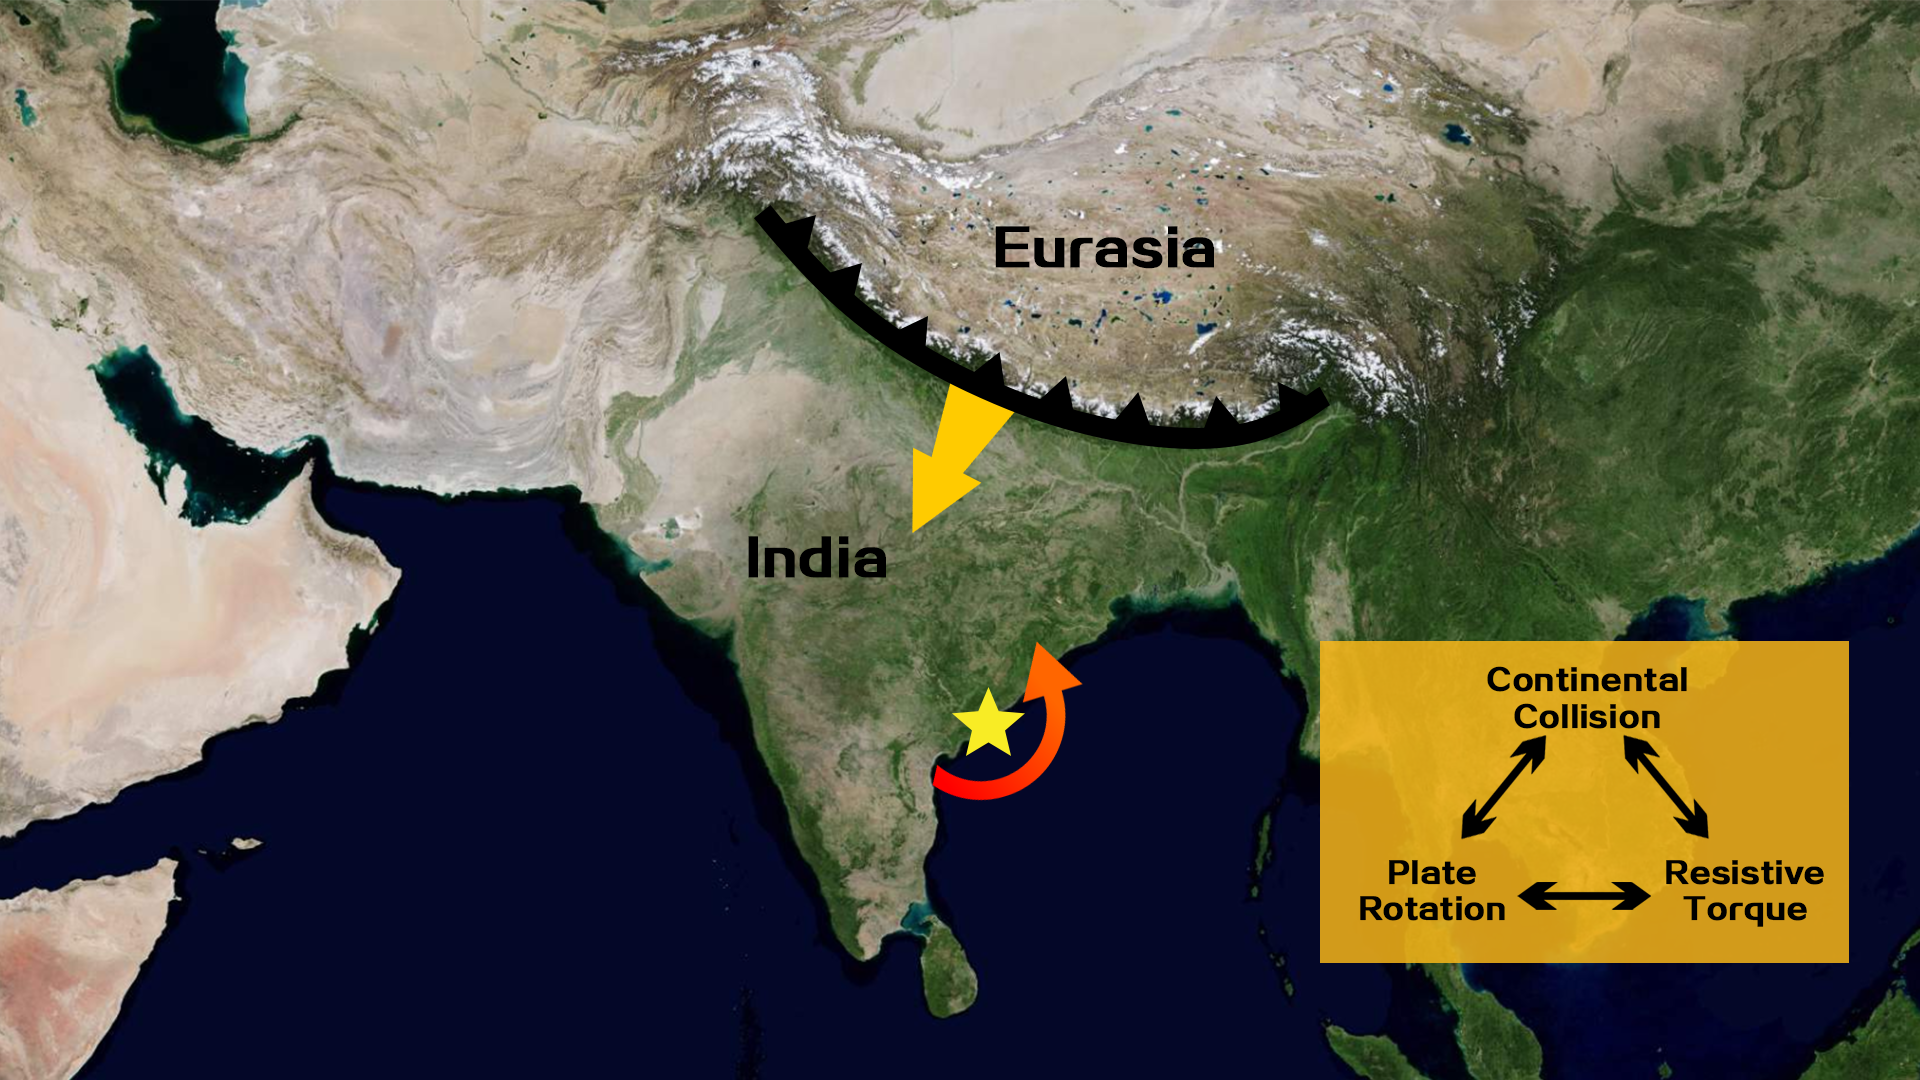 Researchers make progress in understanding India-Eurasia collision process using plate rotation records